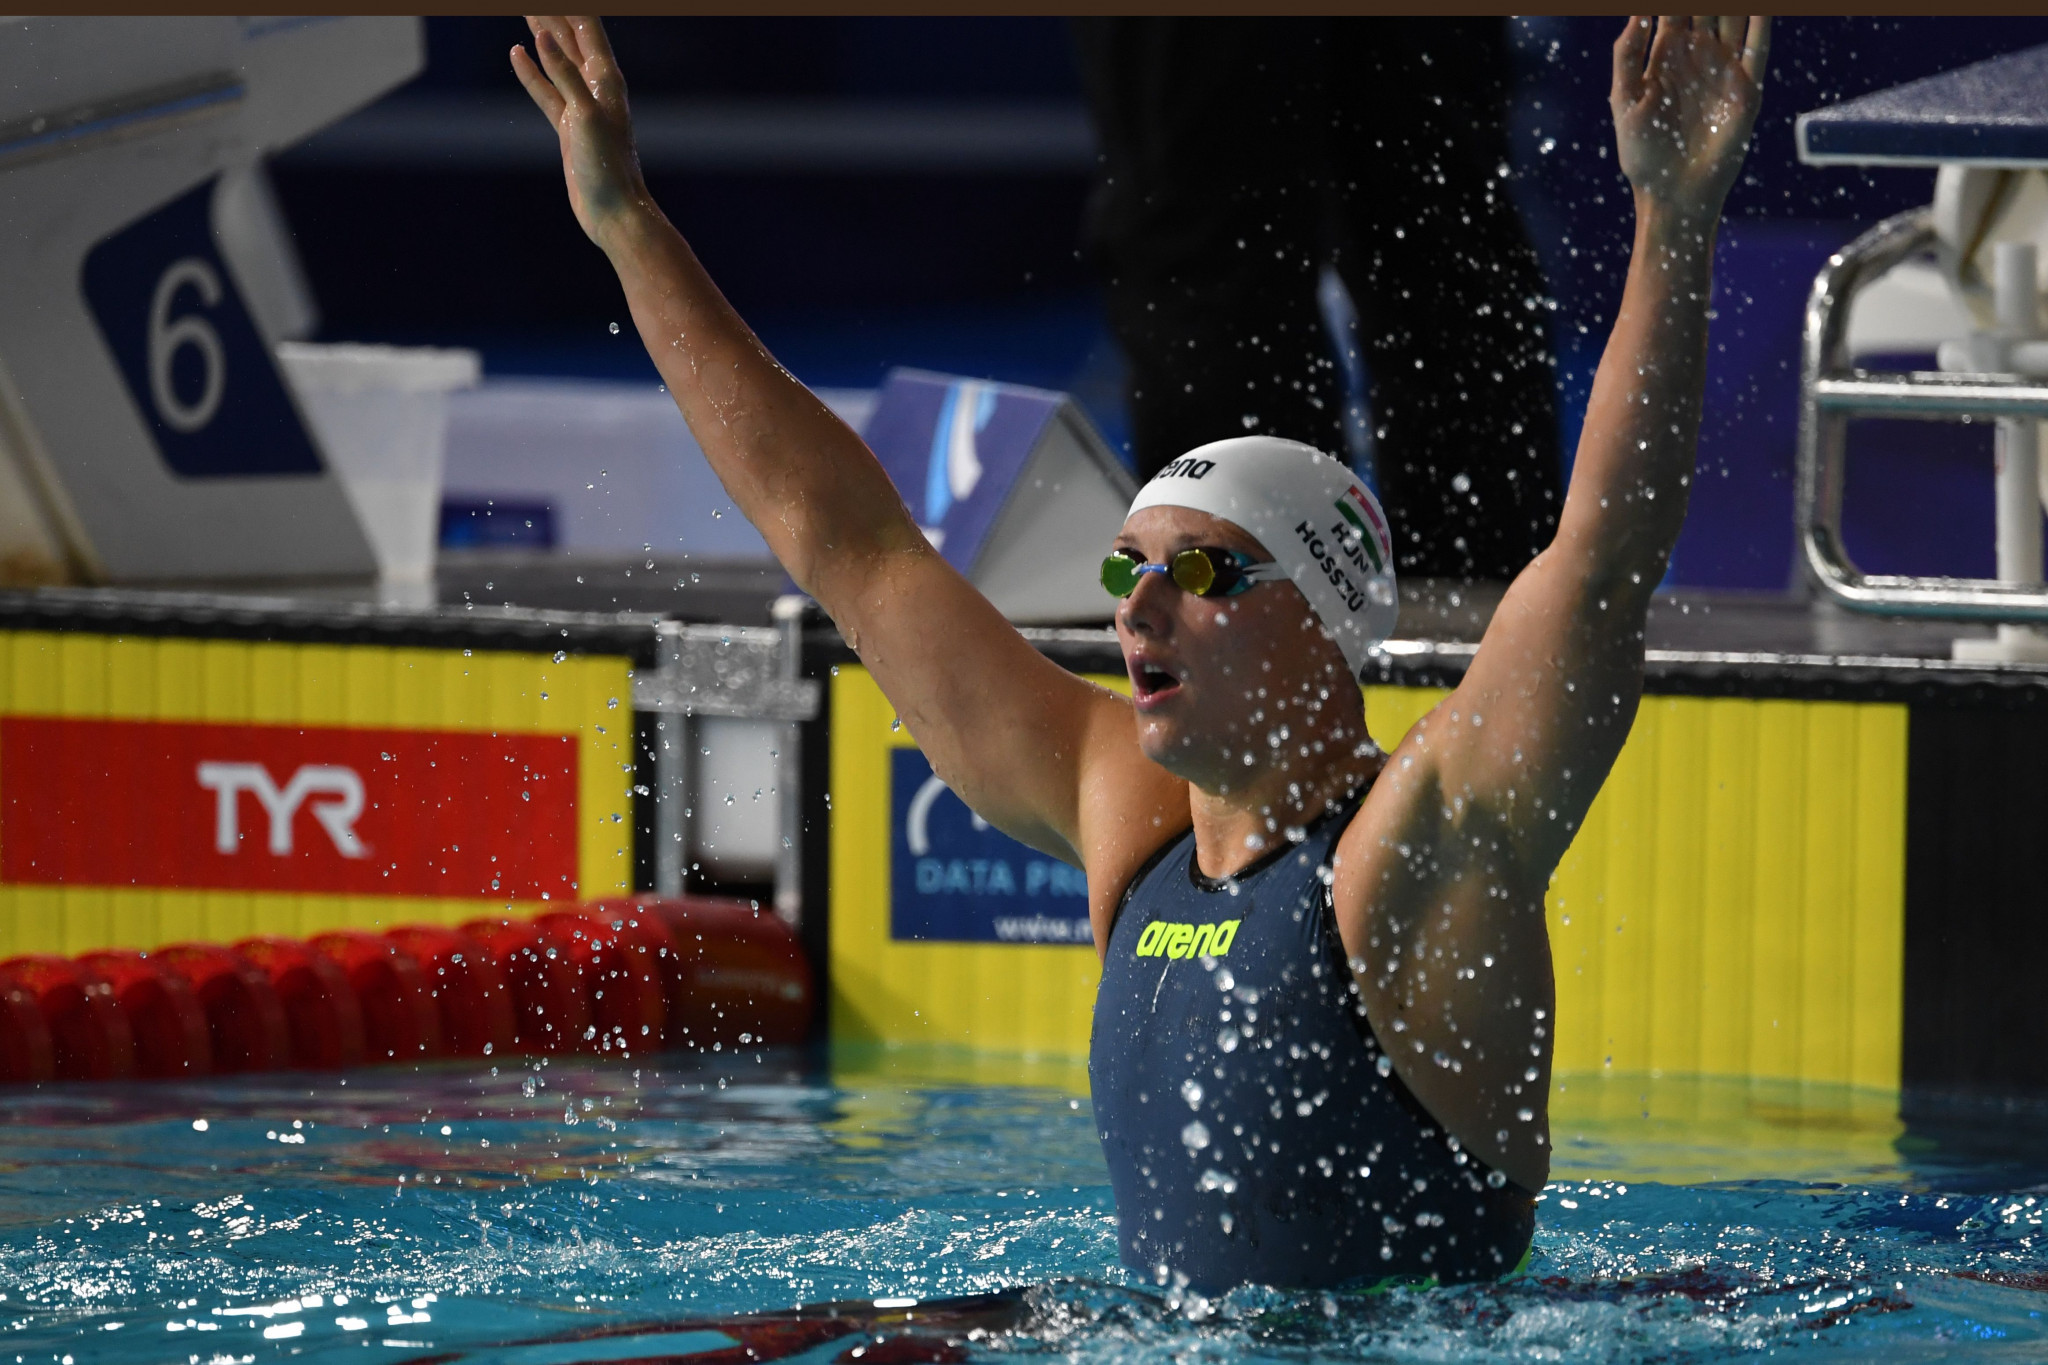 Doha set to stage second event of FINA World Cup season